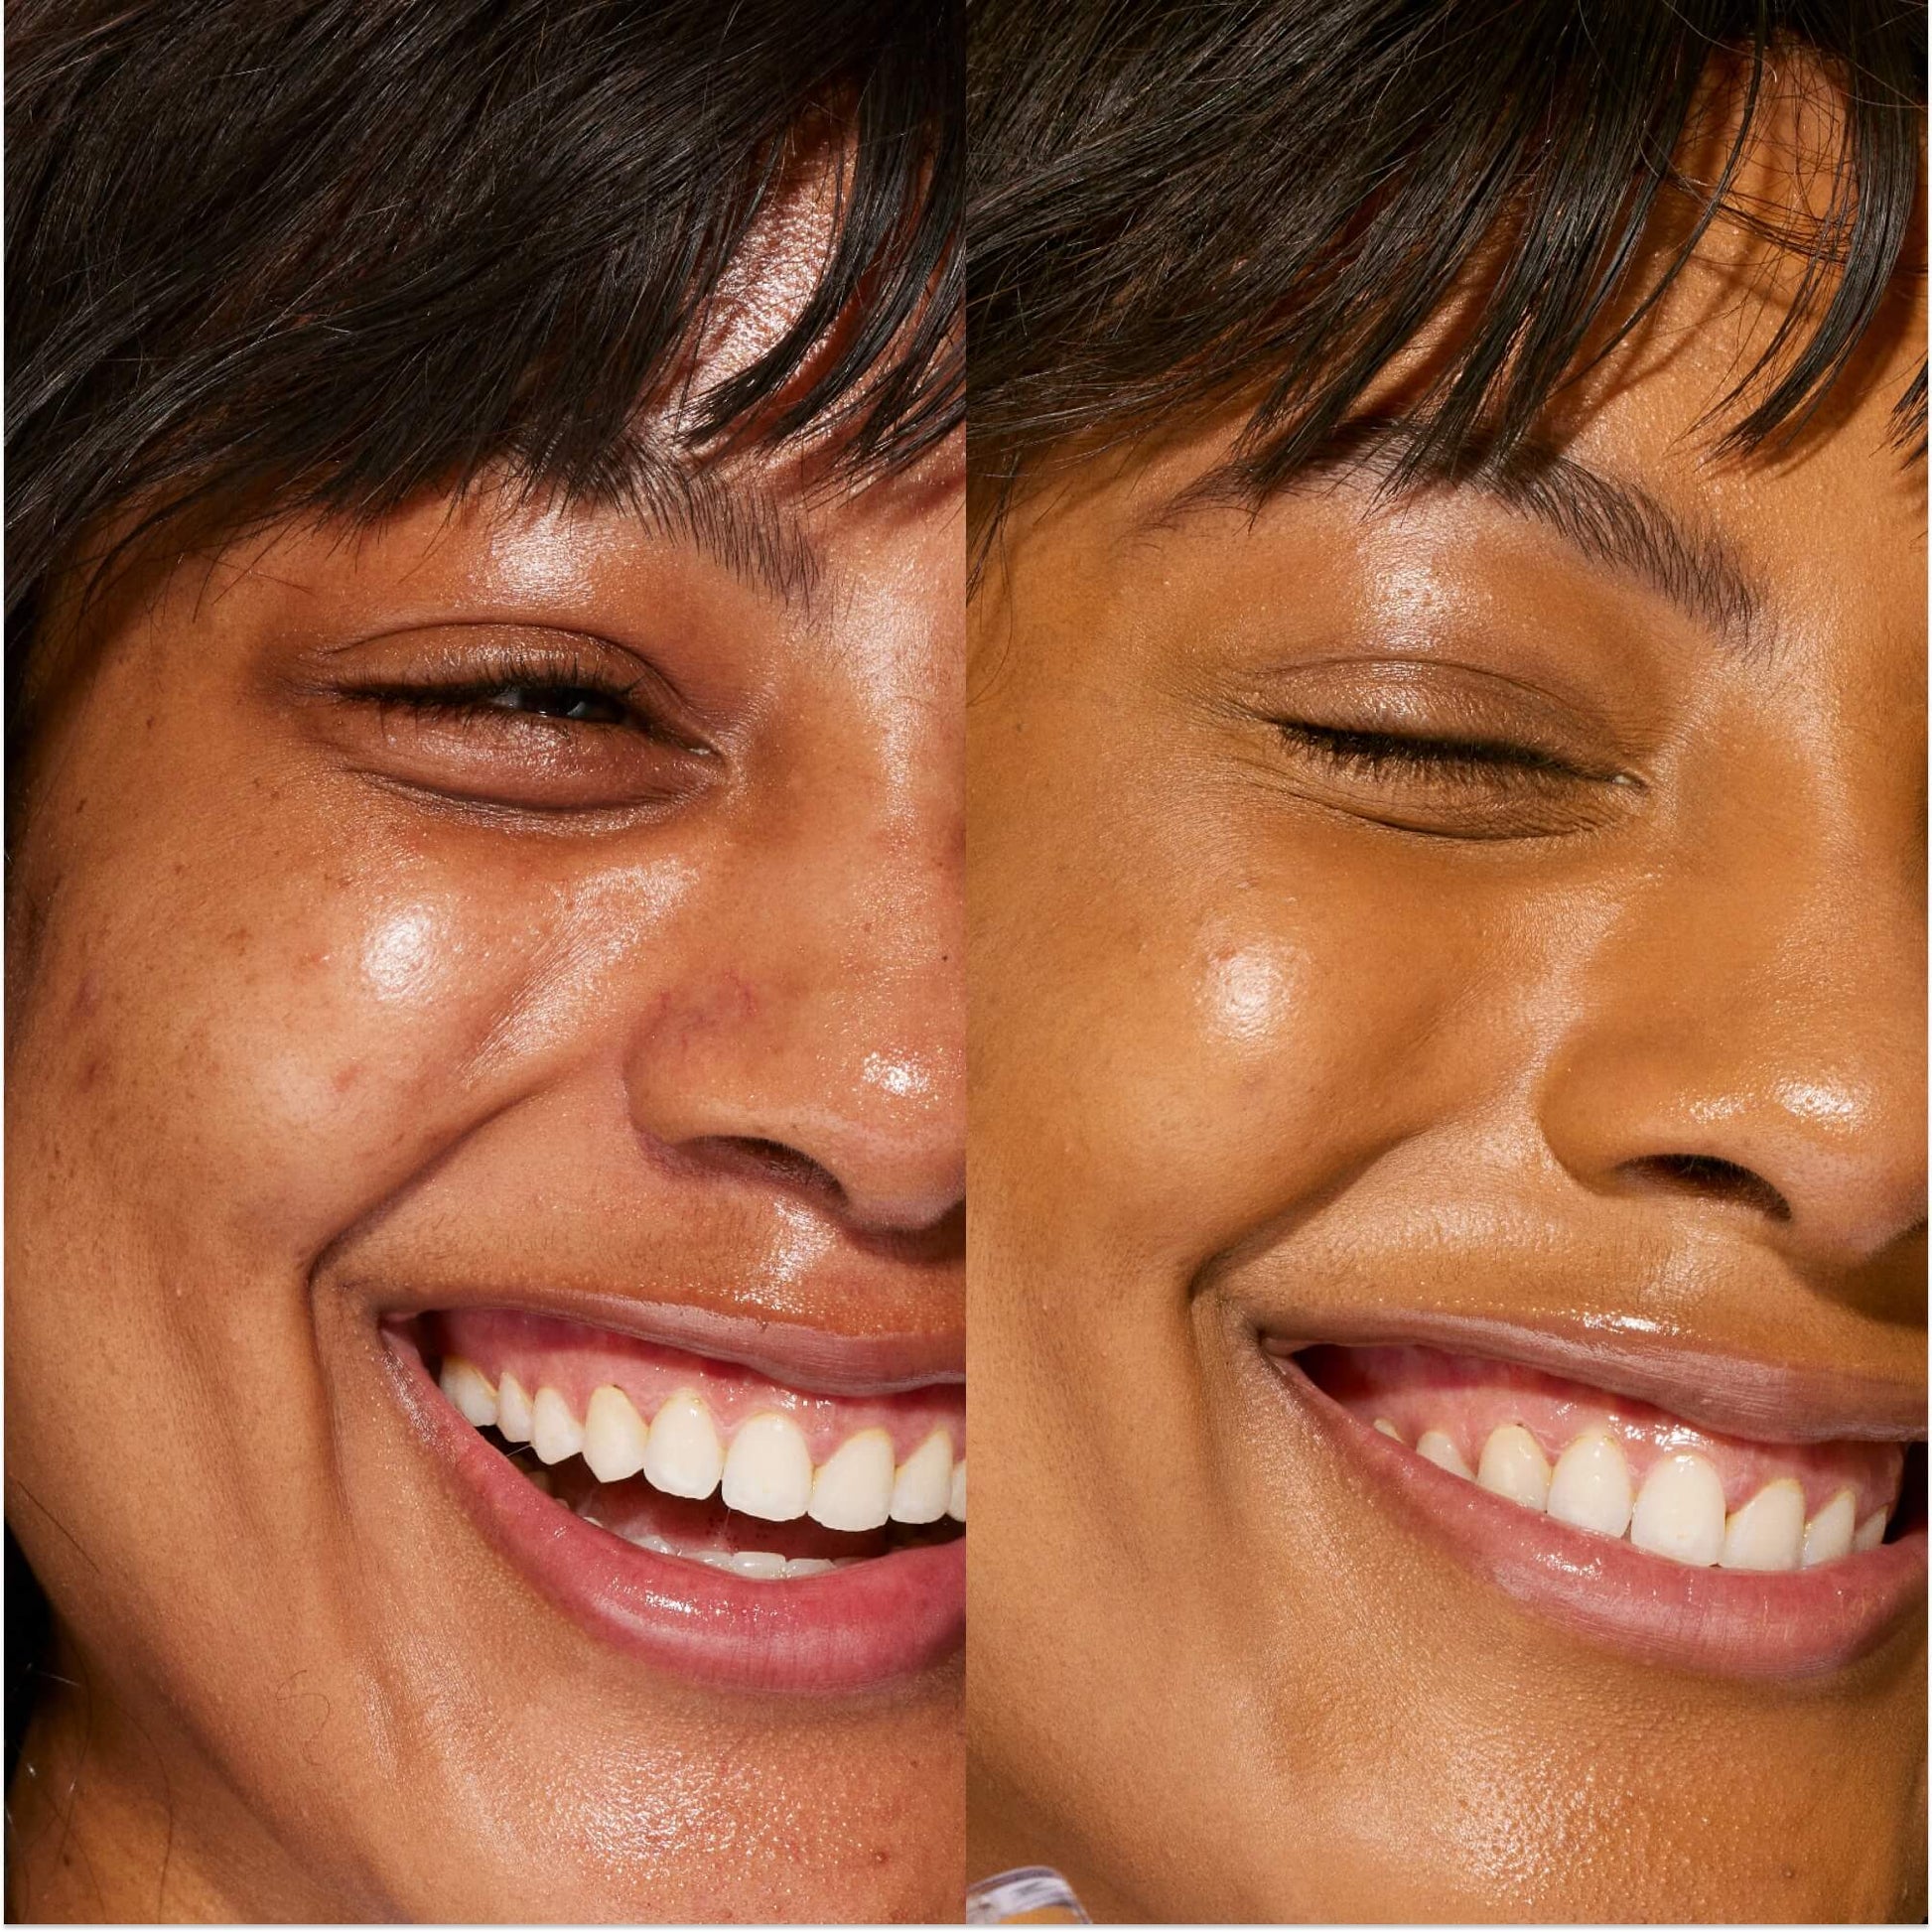 A person's face before and after using Tower 28 Beauty's Swipe Serum Concealer in shade 14.0 PV to cover up dark circles, blemishes, and discoloration